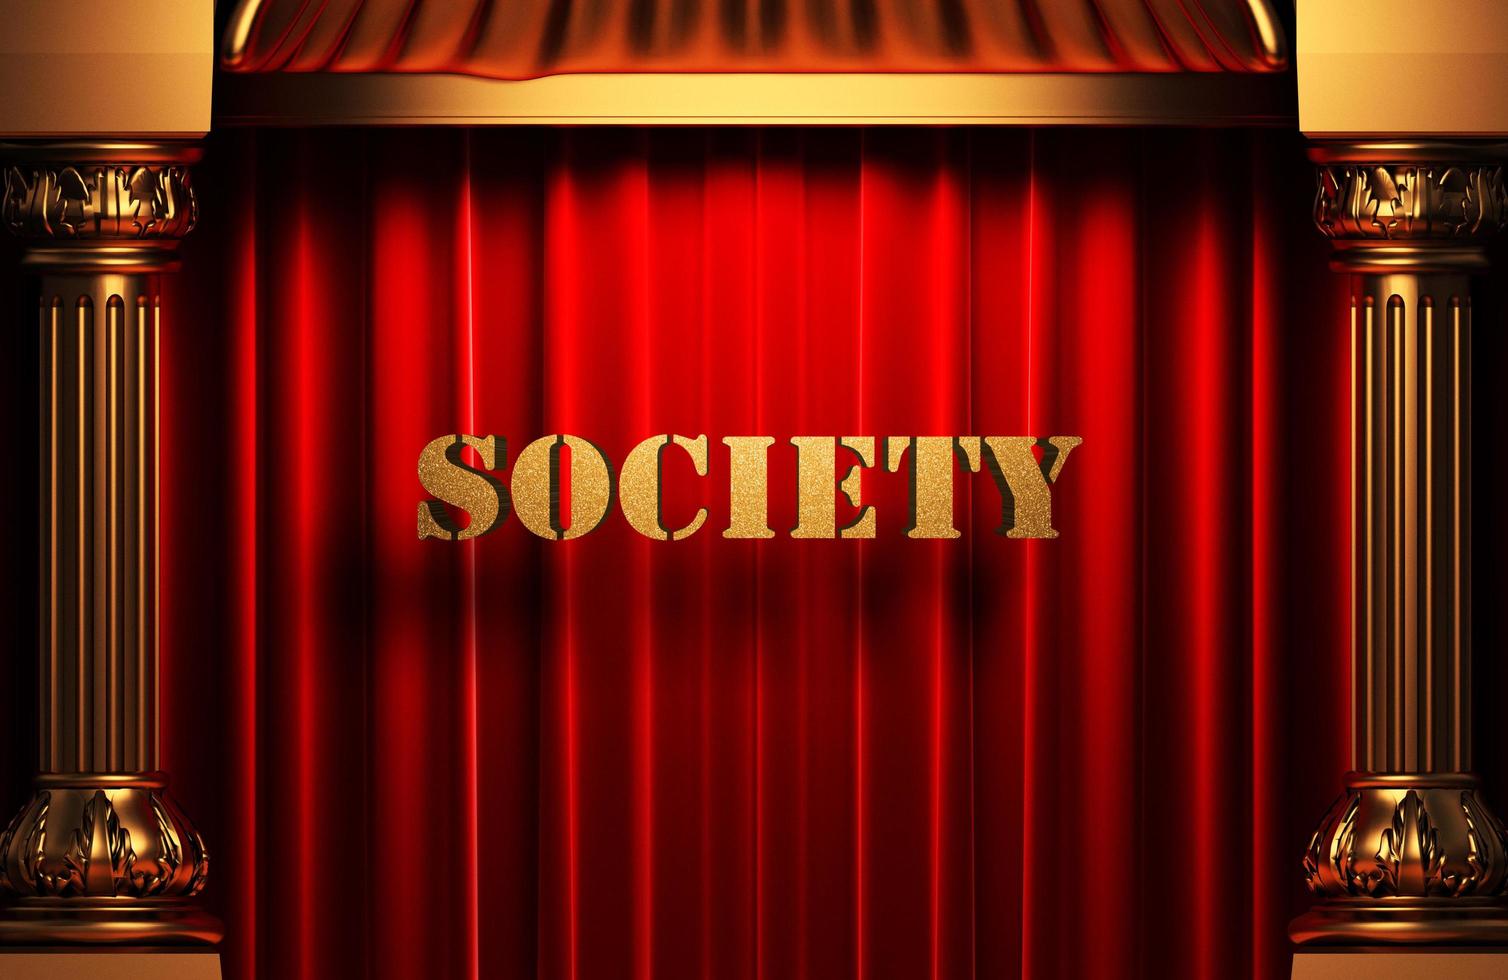 society golden word on red curtain photo